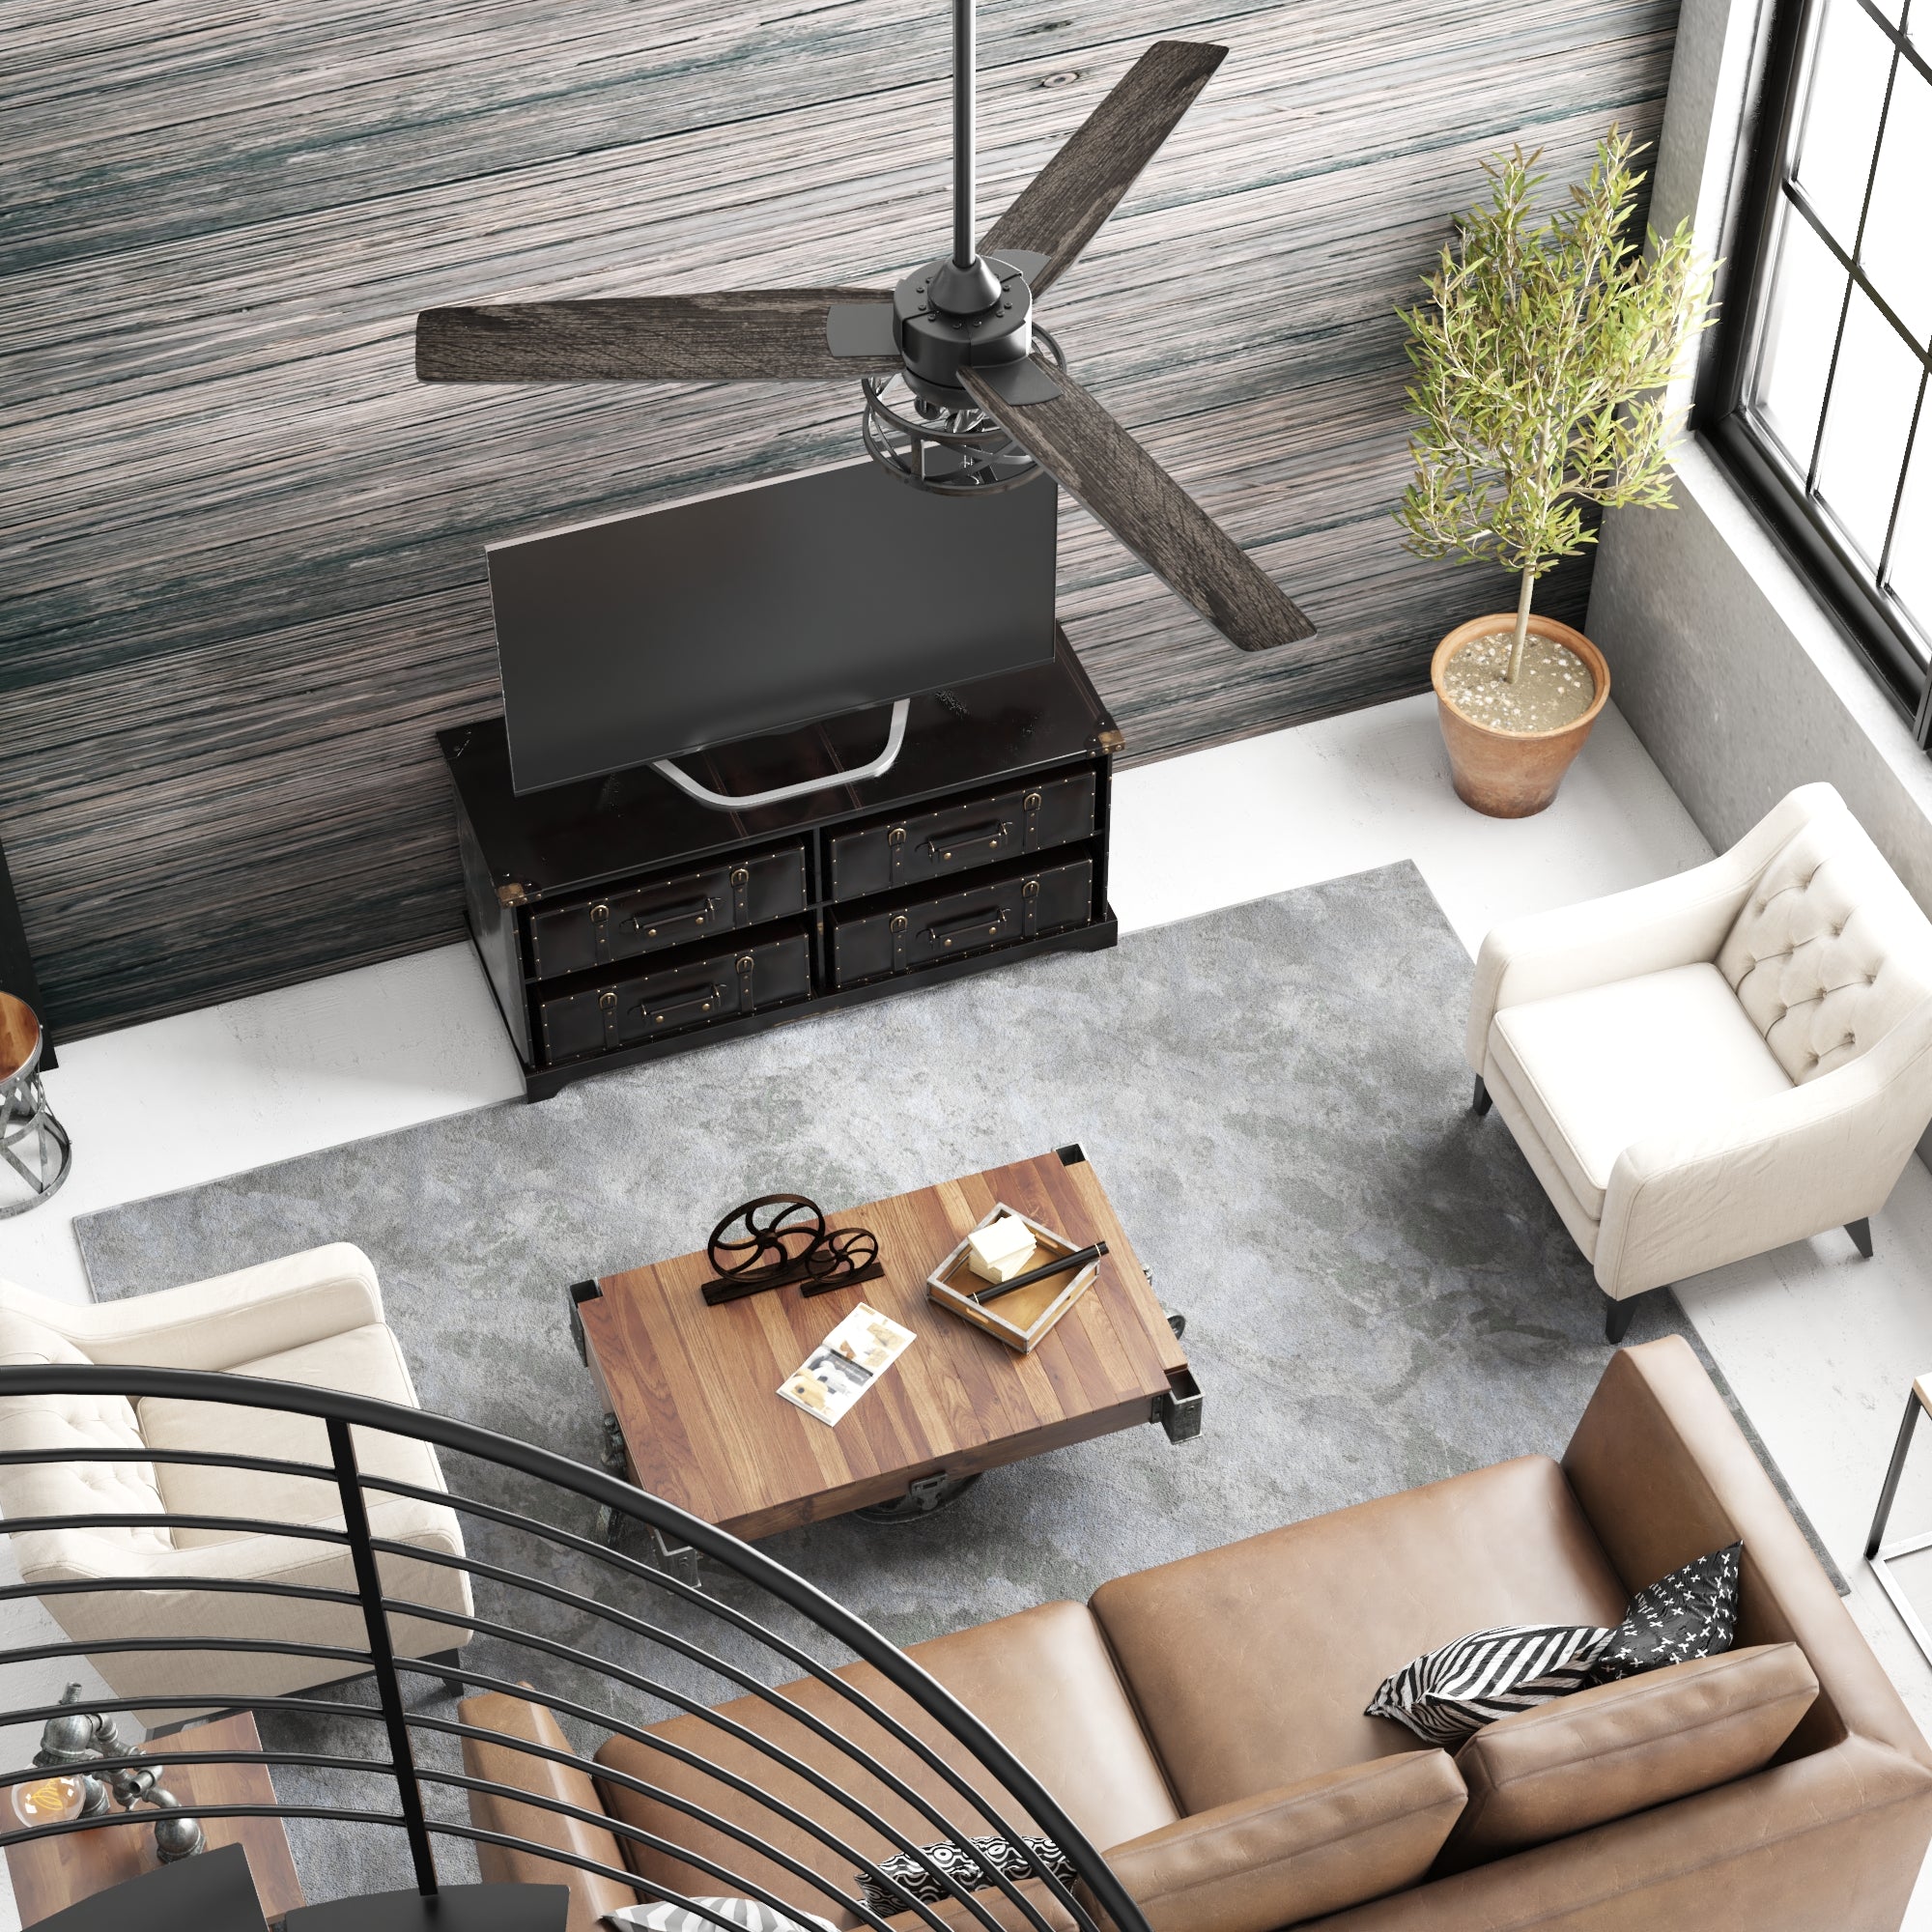 Keep cool with our affordable decorative indoor and outdoor ceiling fan collections.